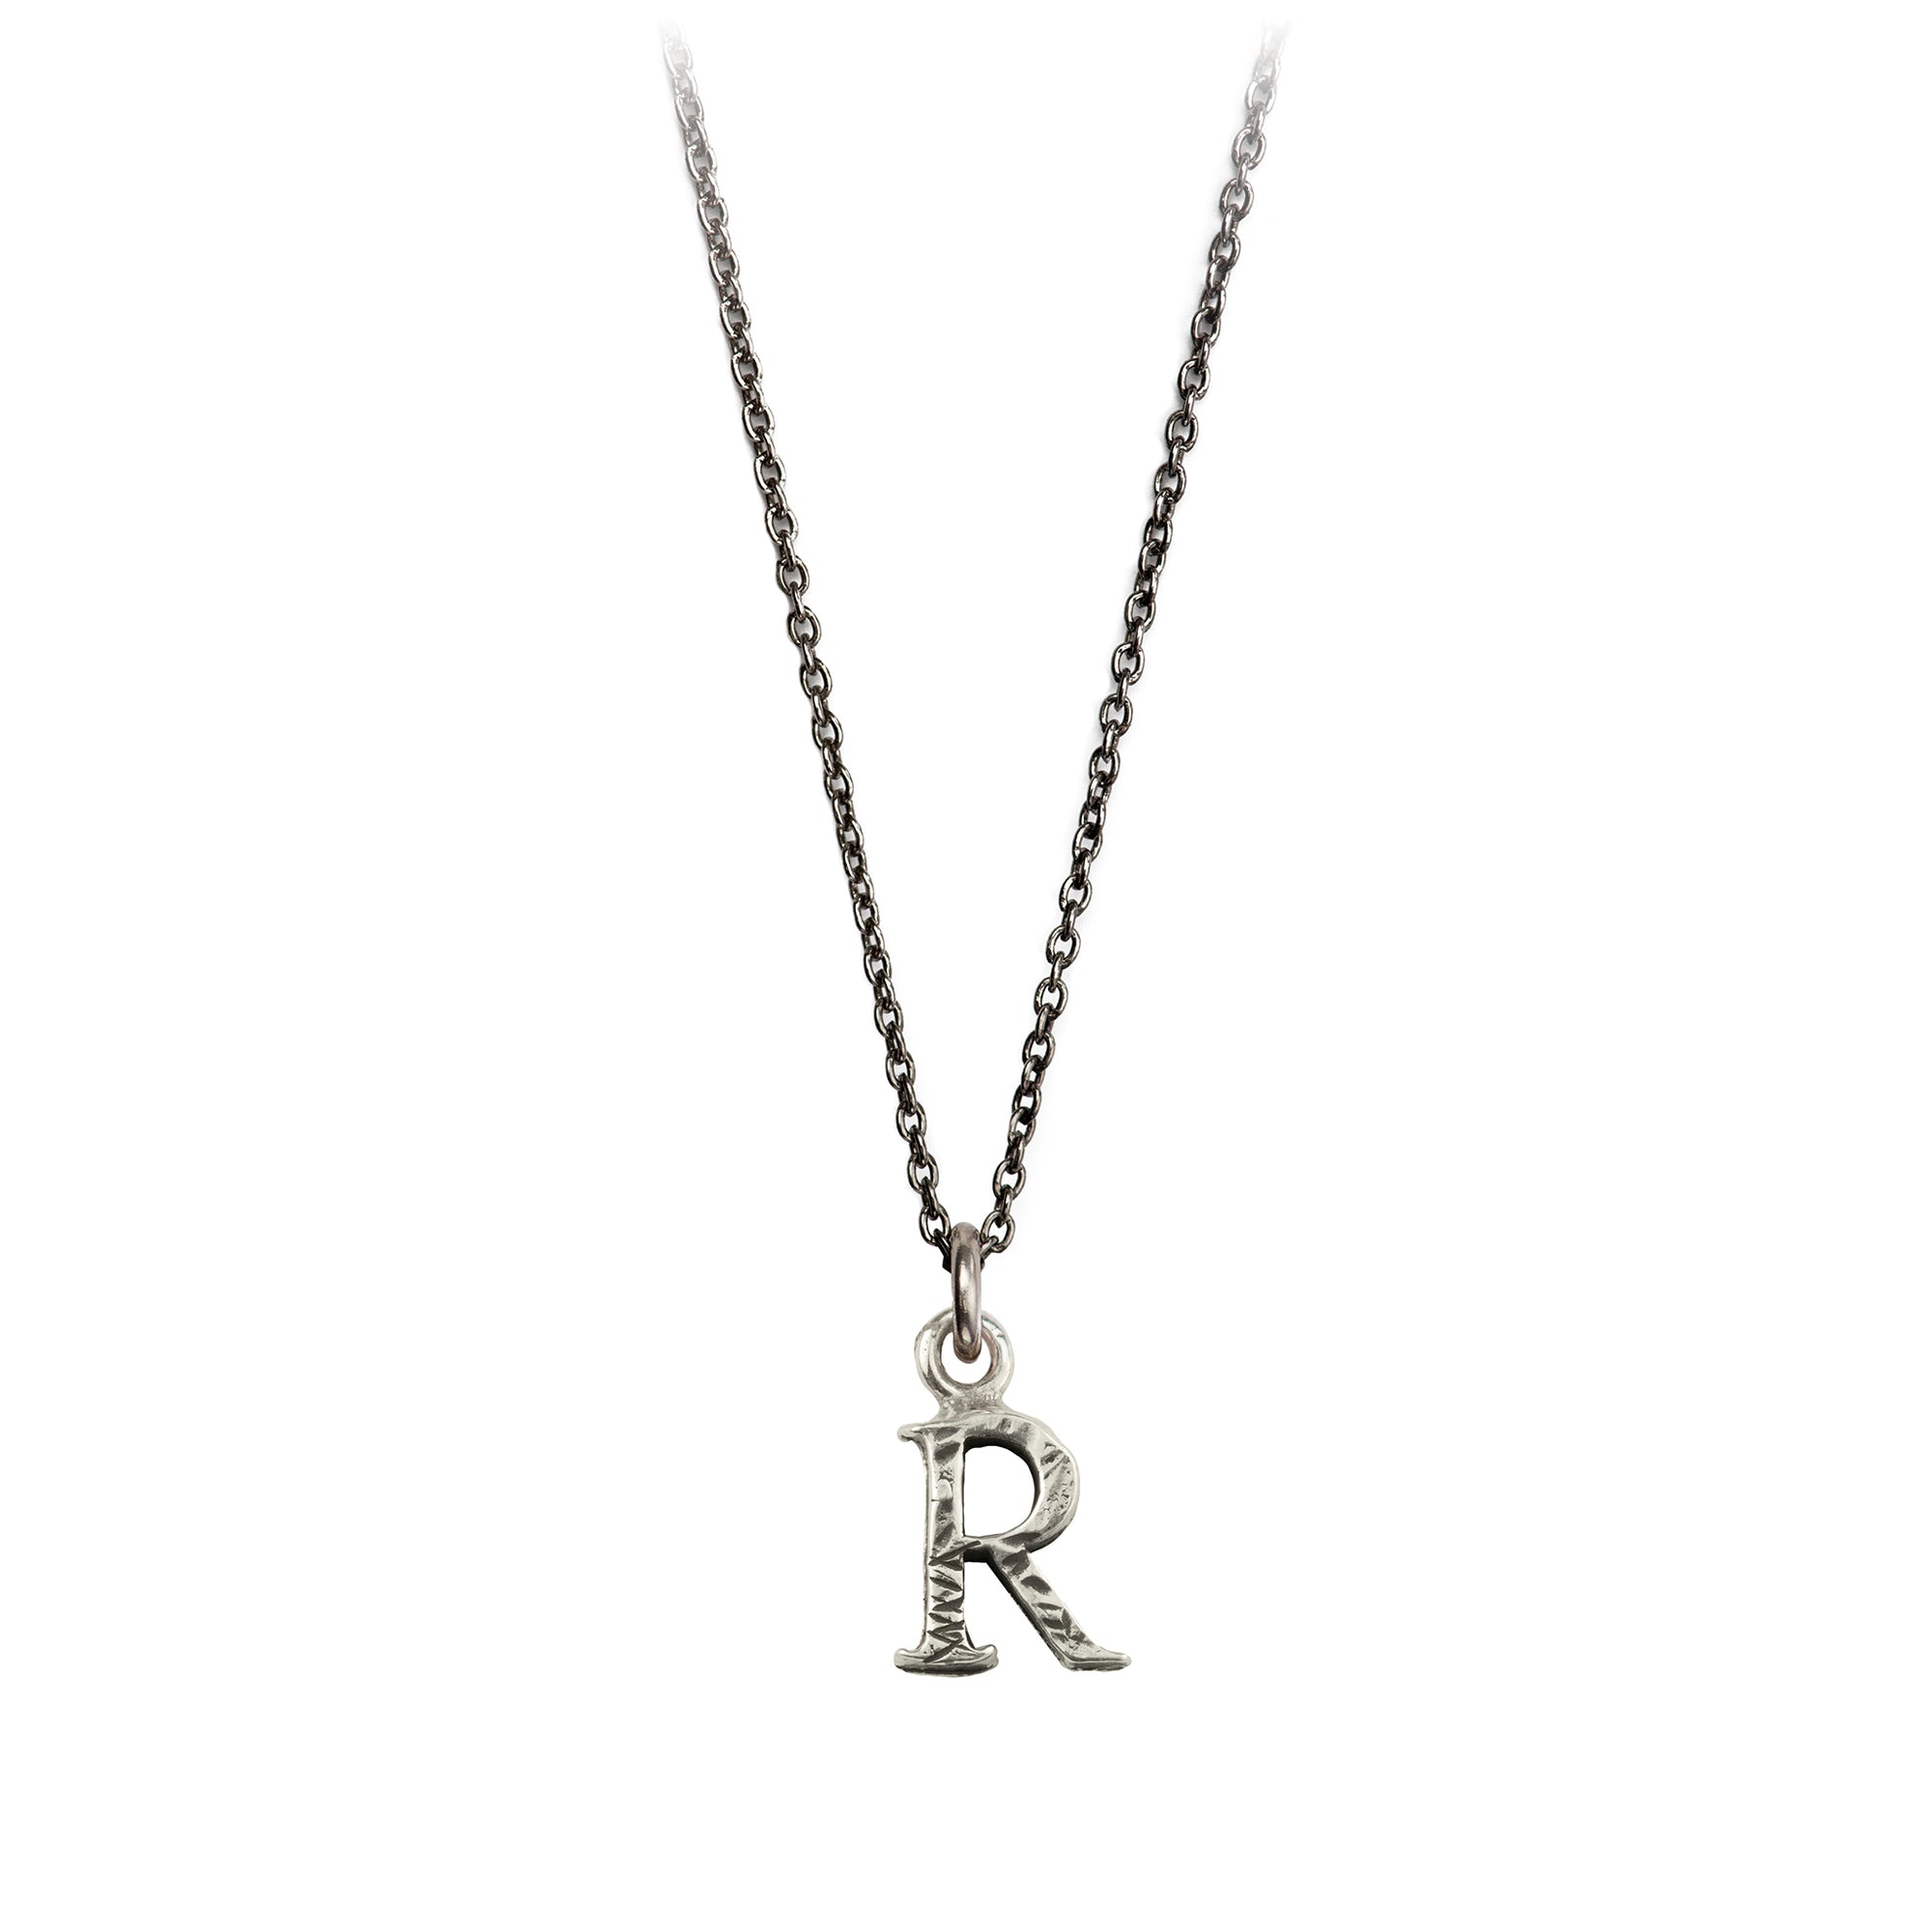 A sterling silver letter "R" charm on a silver chain.